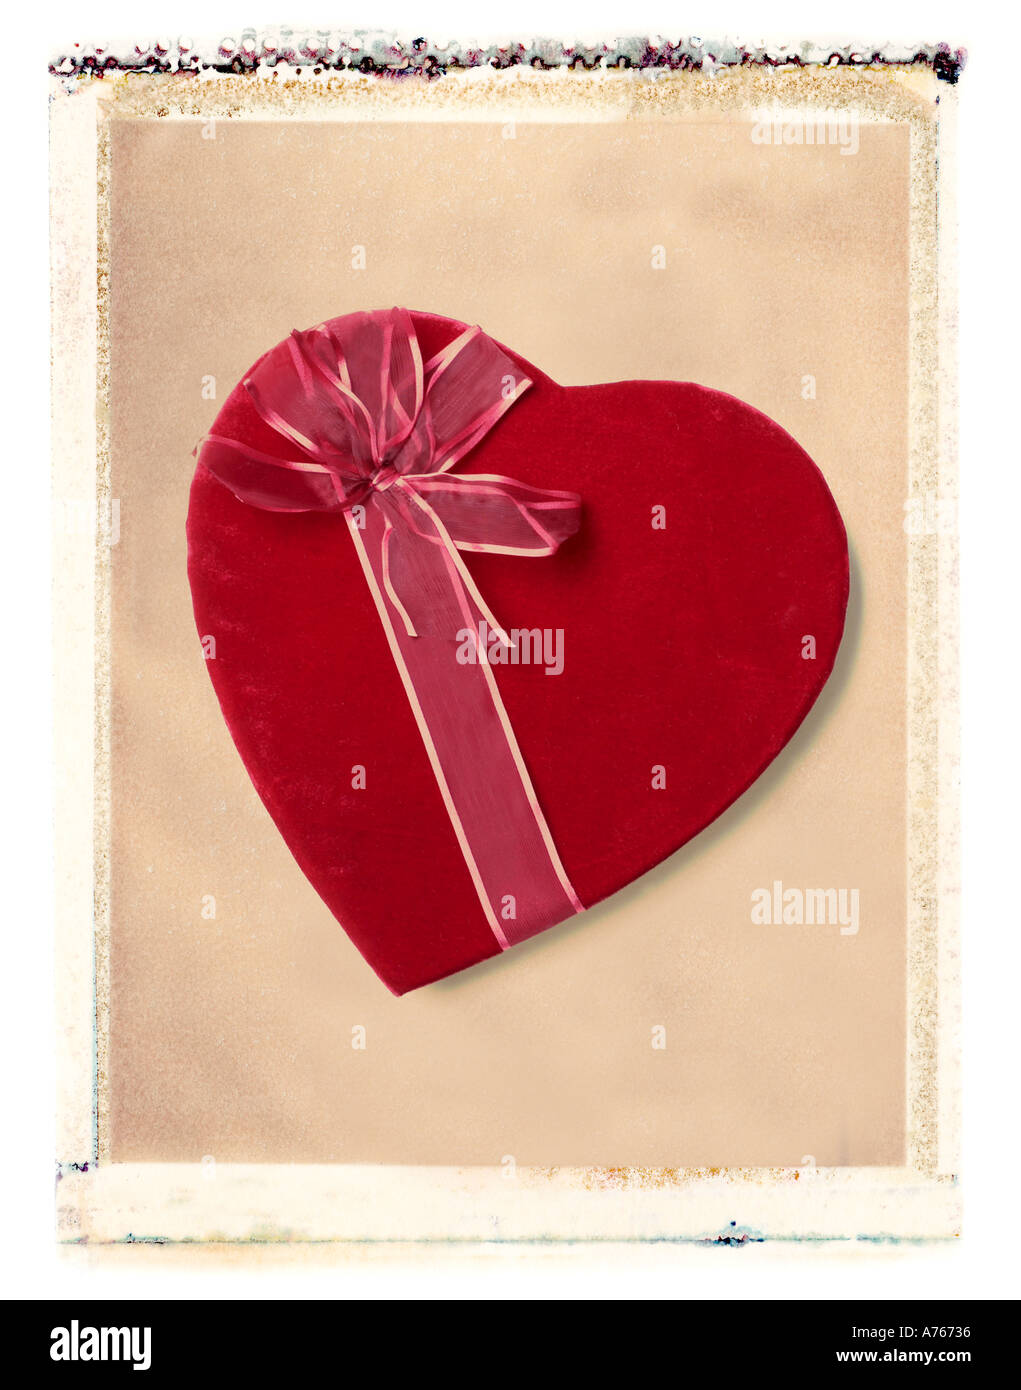 Valentine s day candy heart gift Banque D'Images